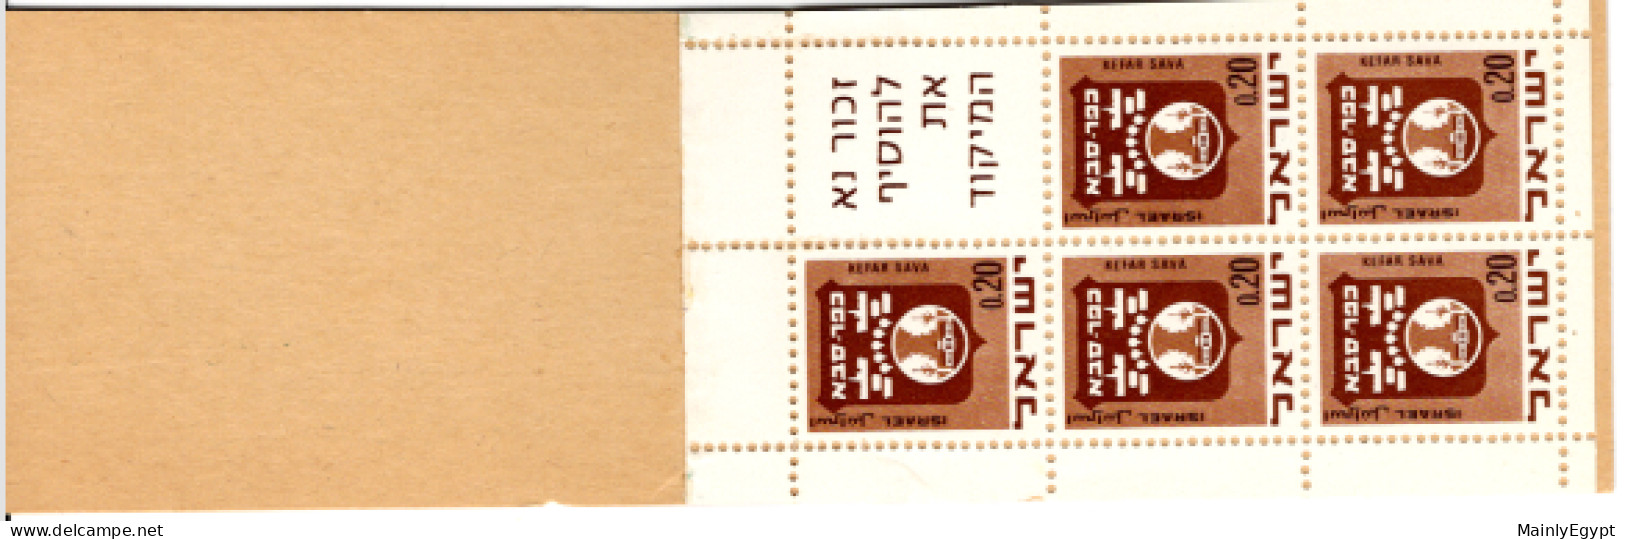 ISRAEL:  Stamp Booklet 1971 Cities 0.20 Shekel MNH #F028 - Booklets